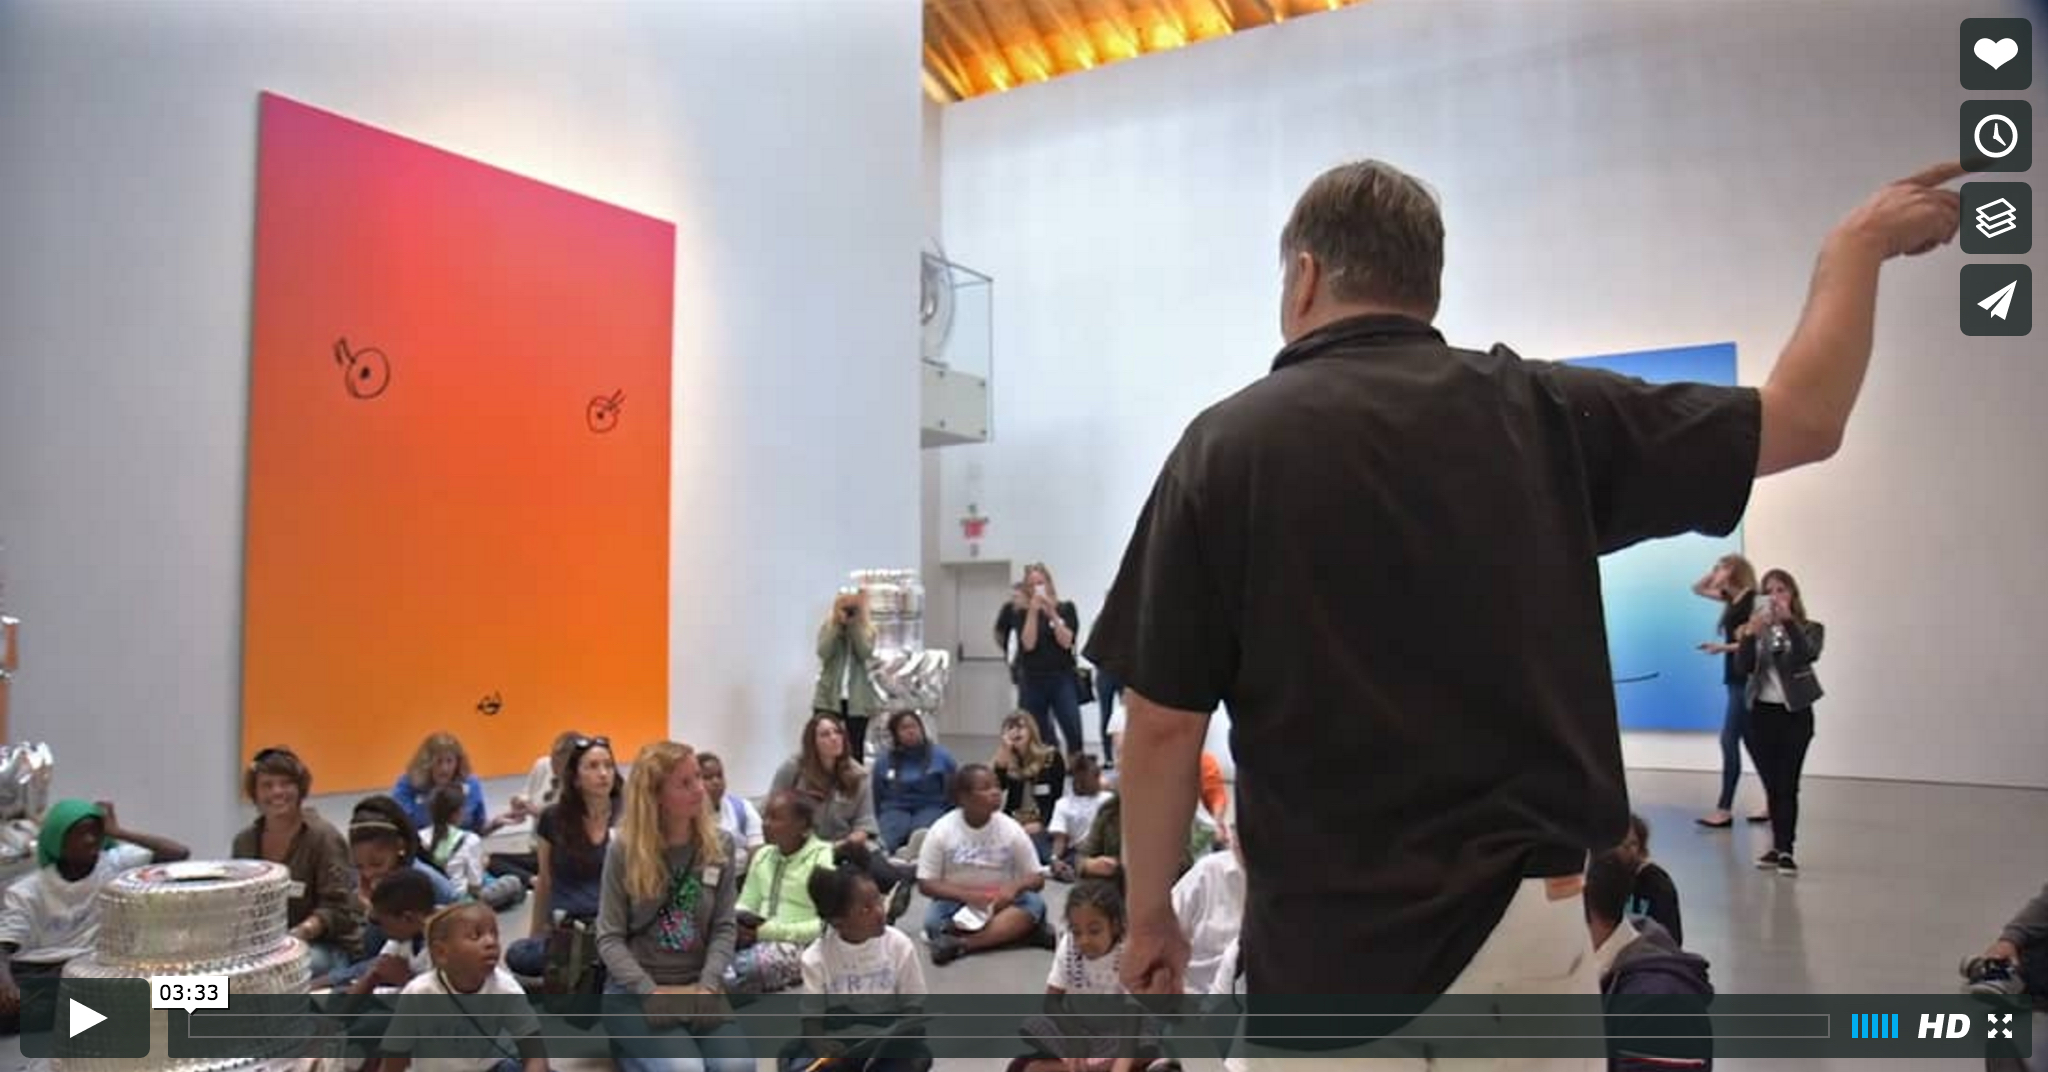 Rob Pruitt Inspired Free Arts Day at The Brant Foundation